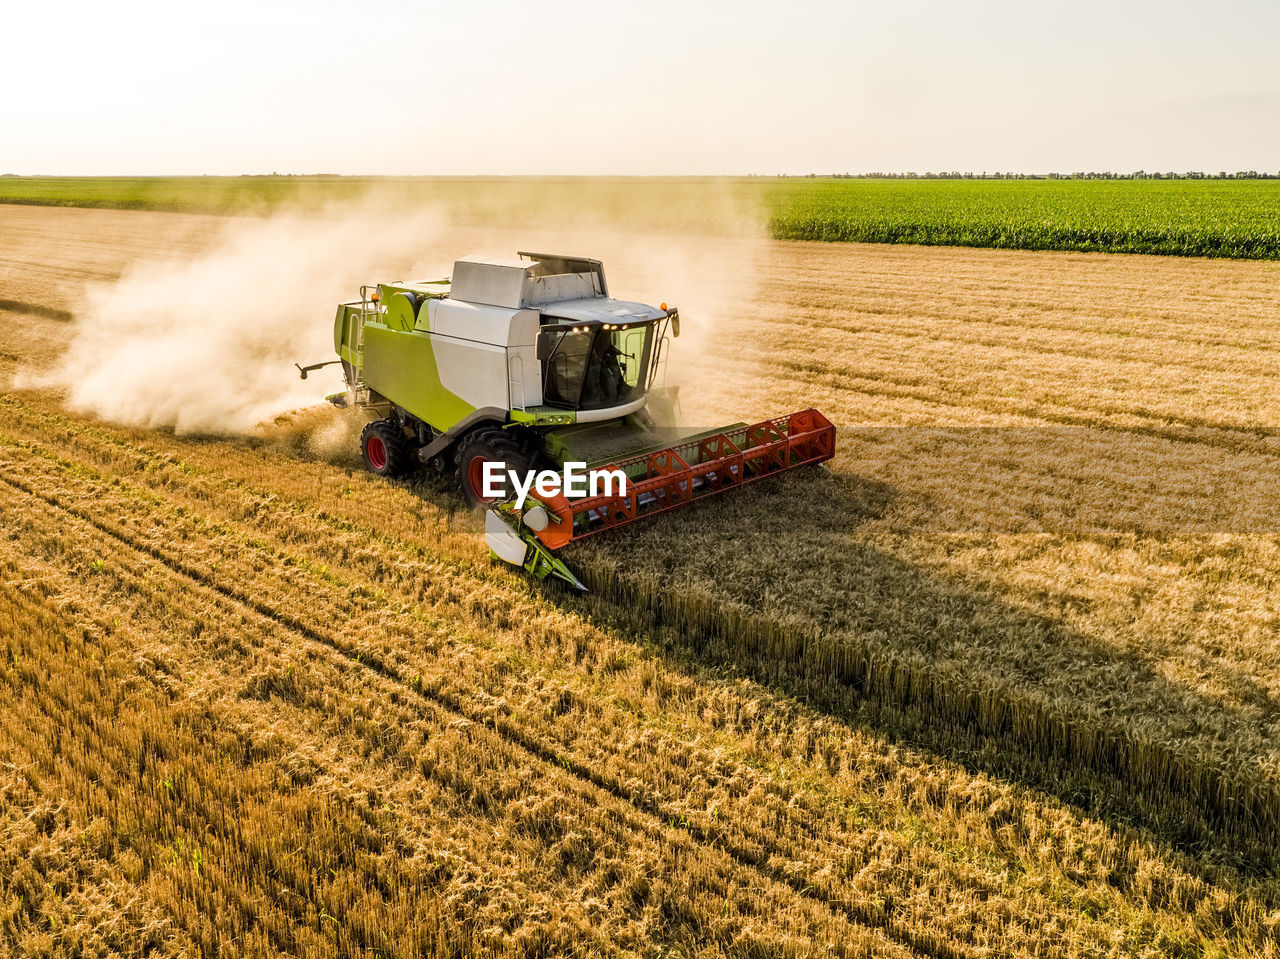 Drone view of combine harvester in wheat field